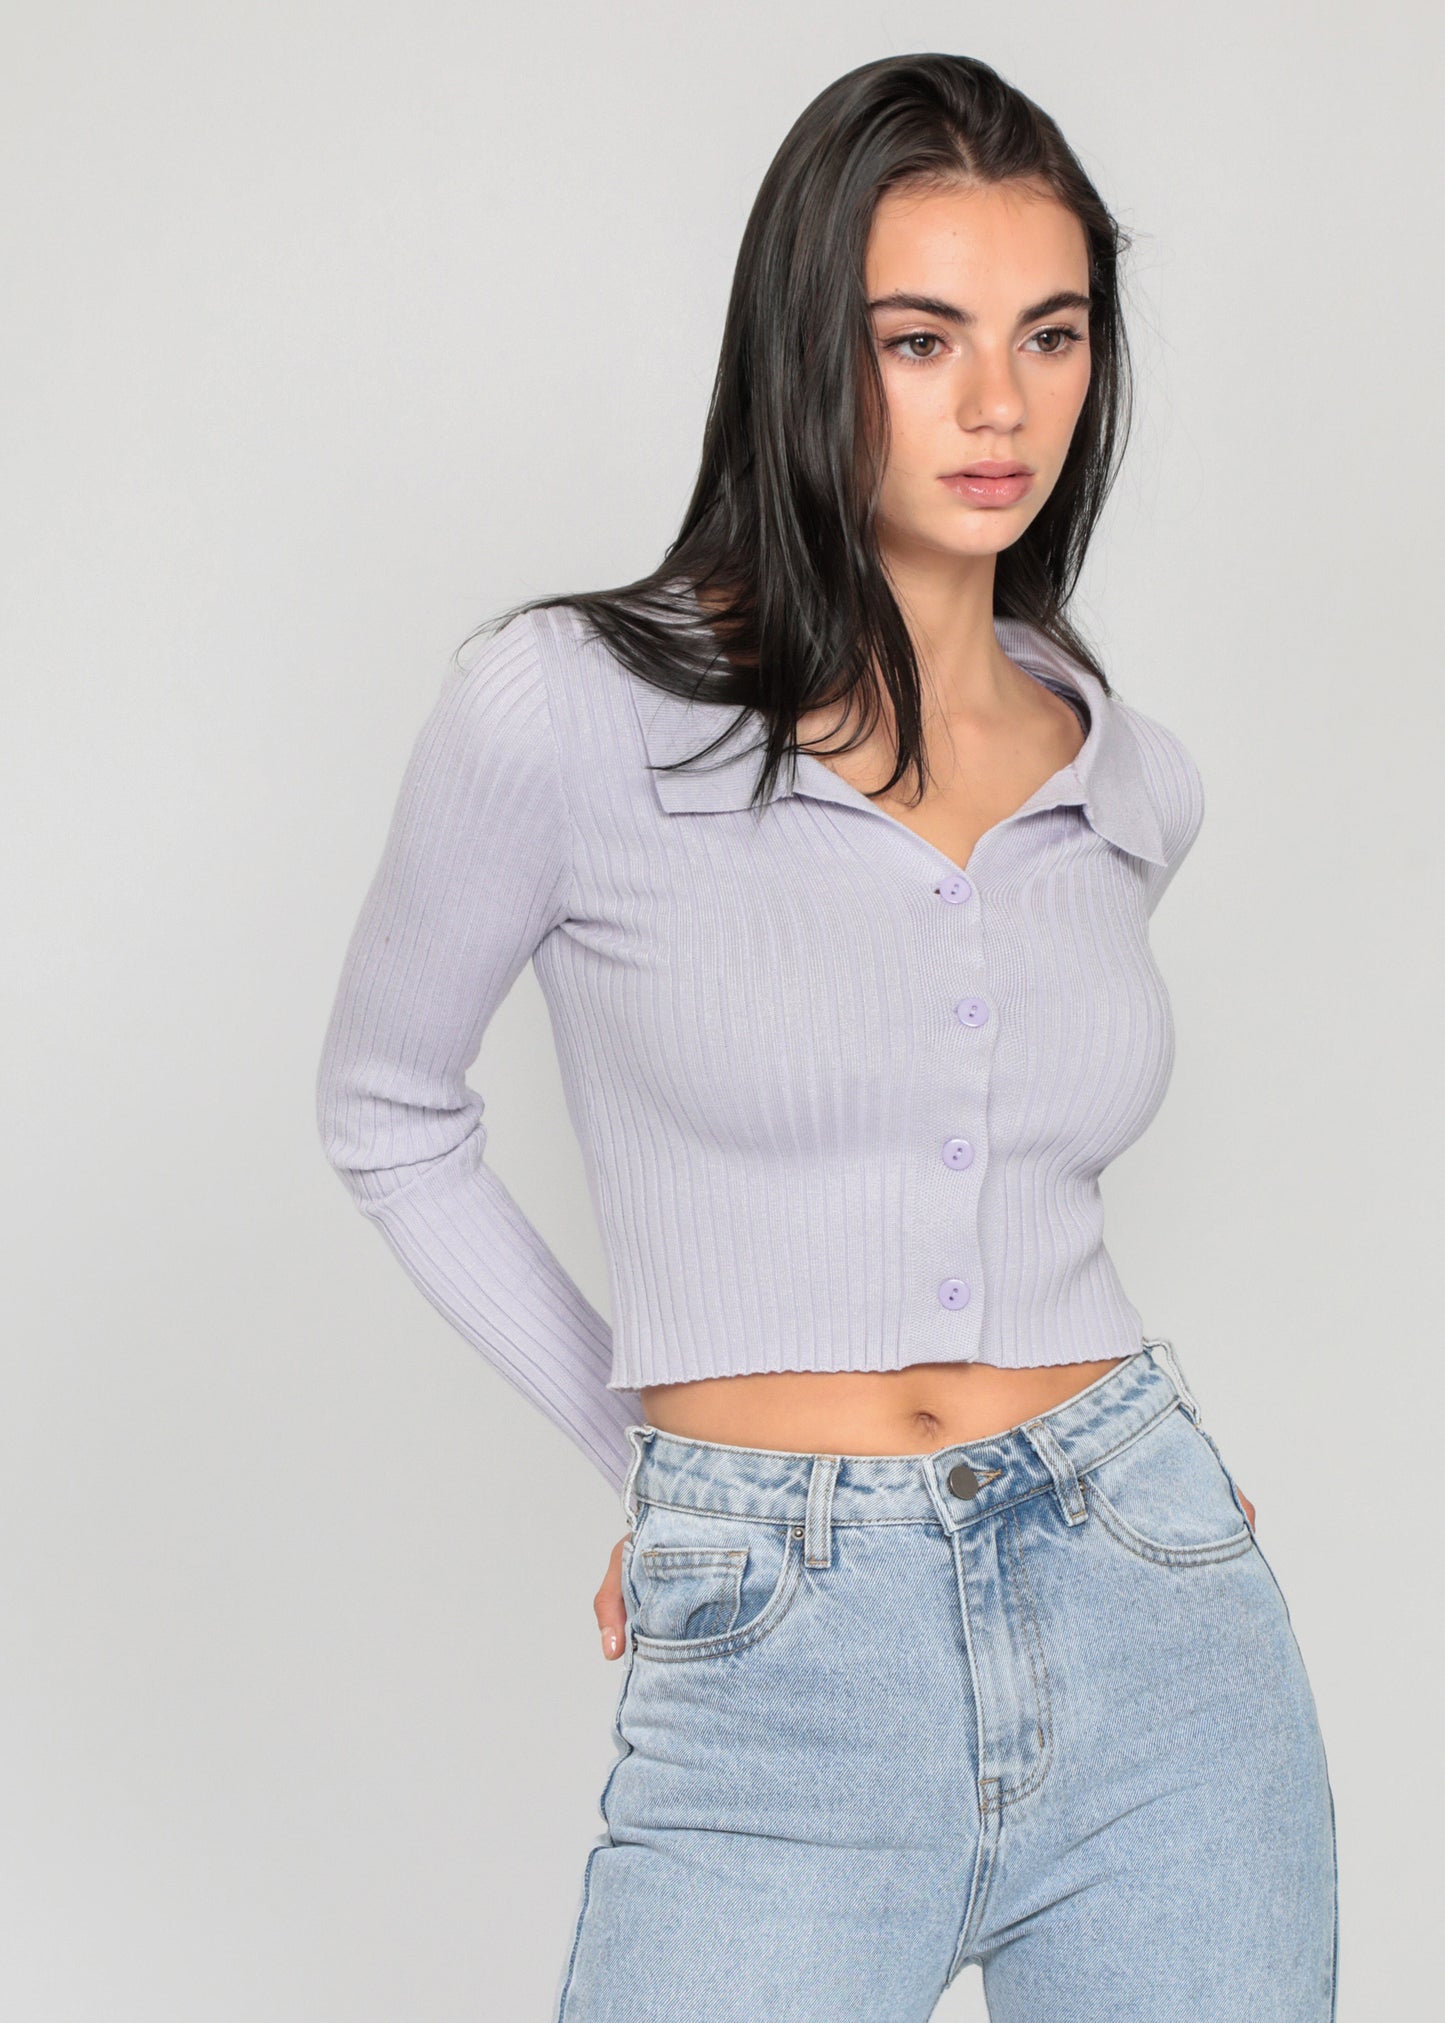 Ribbed jumper with revere collar in lilac